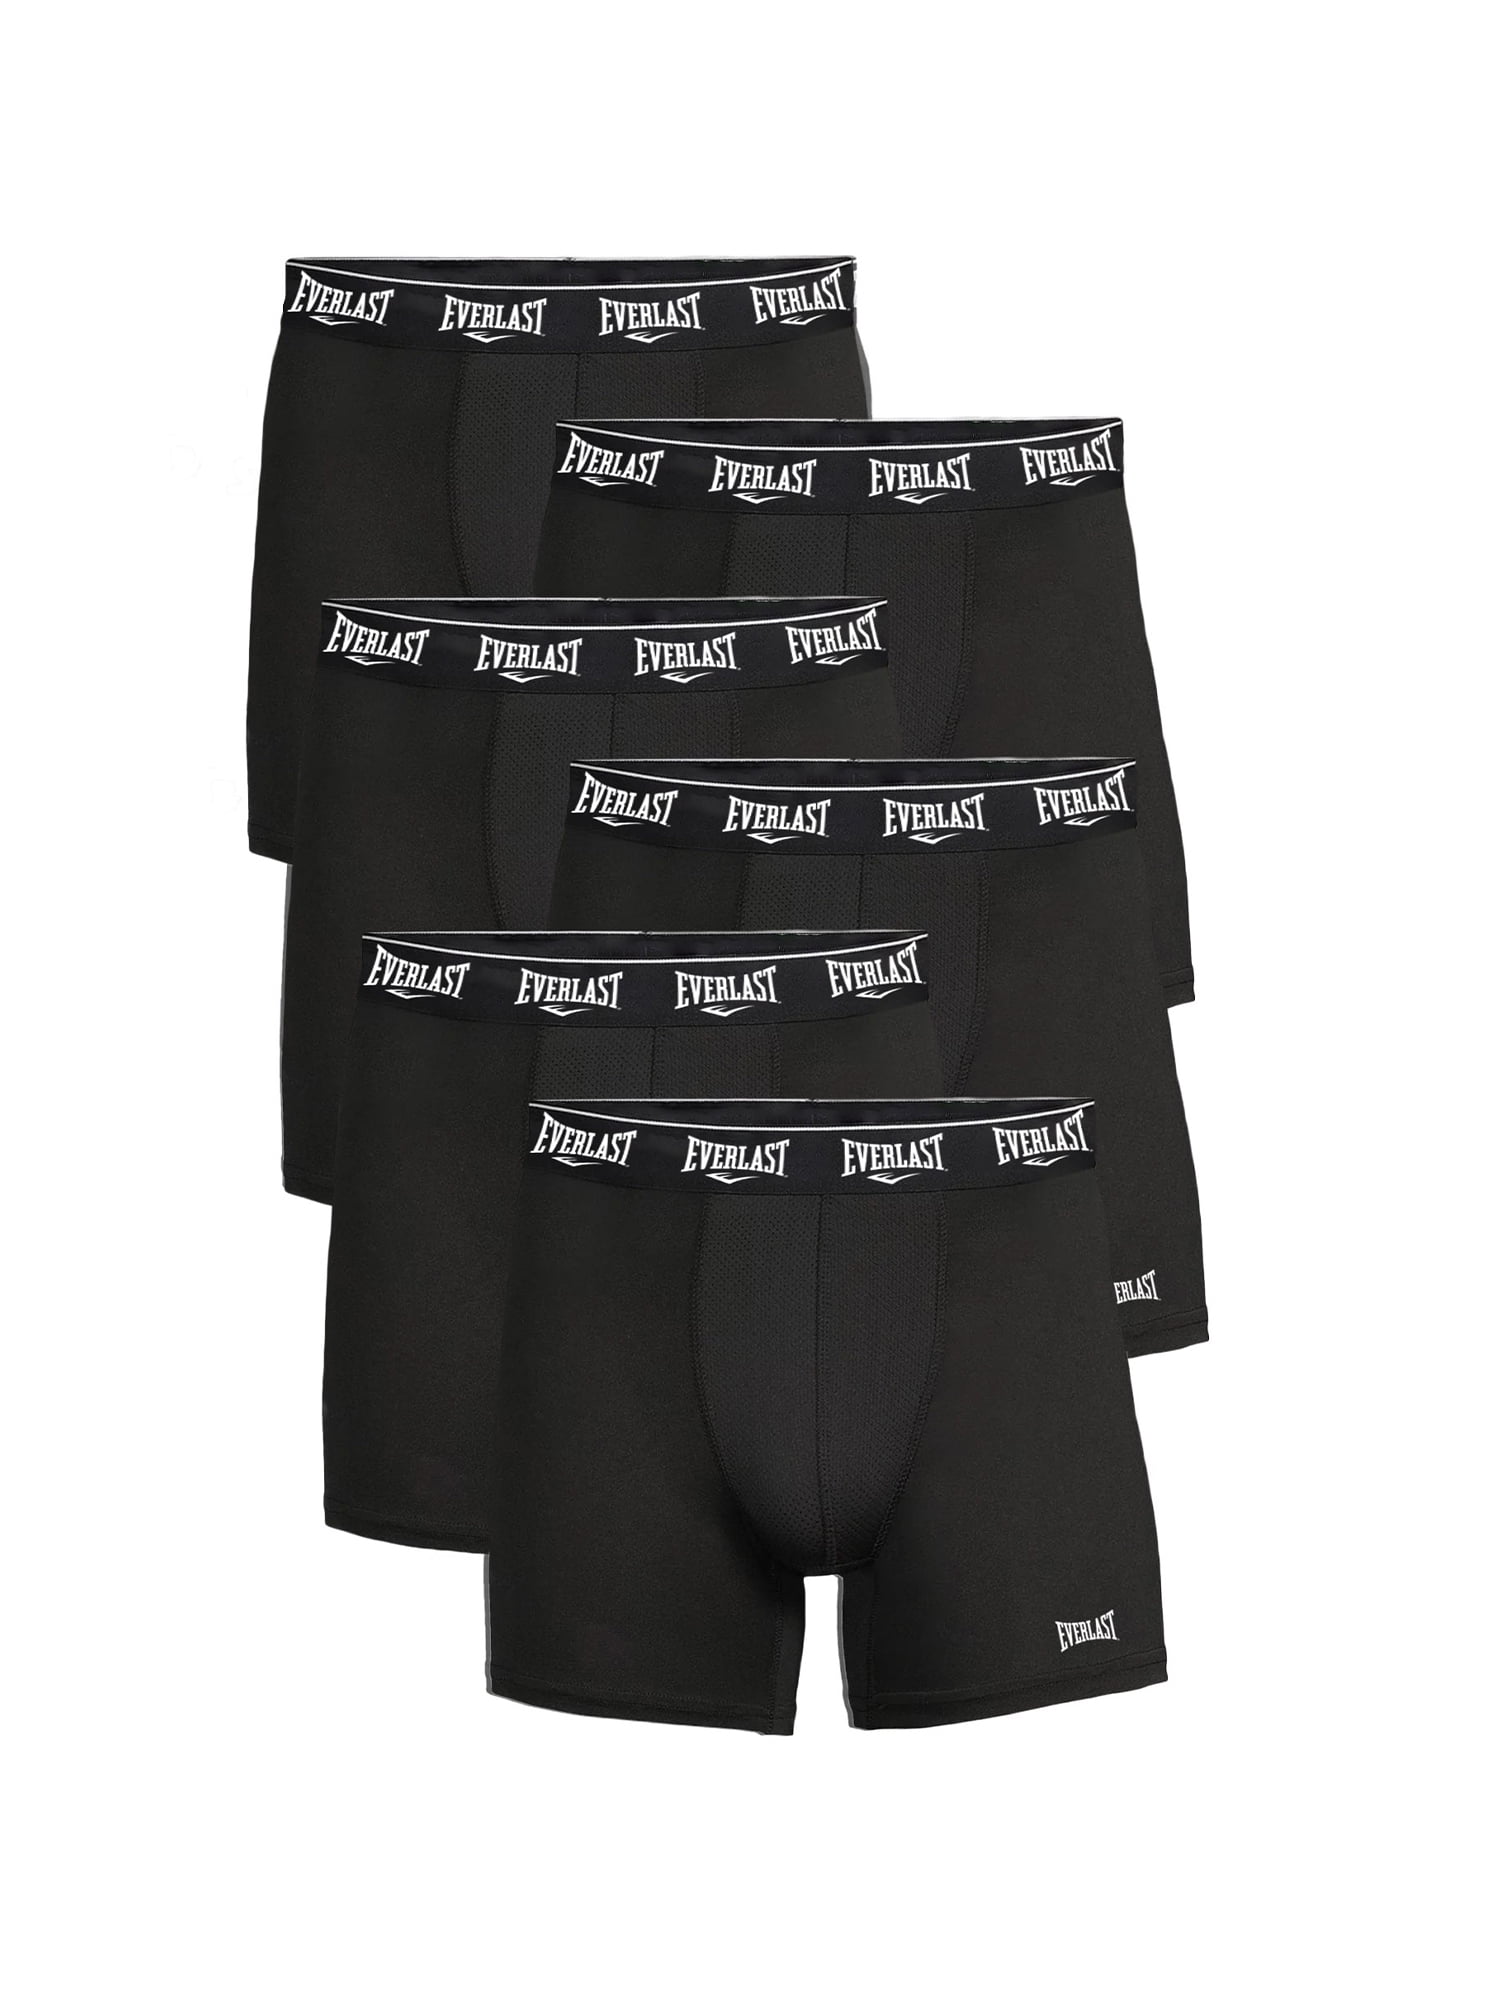 Everlast Mens Boxer Briefs Active Performance Breathable Underwear for ...